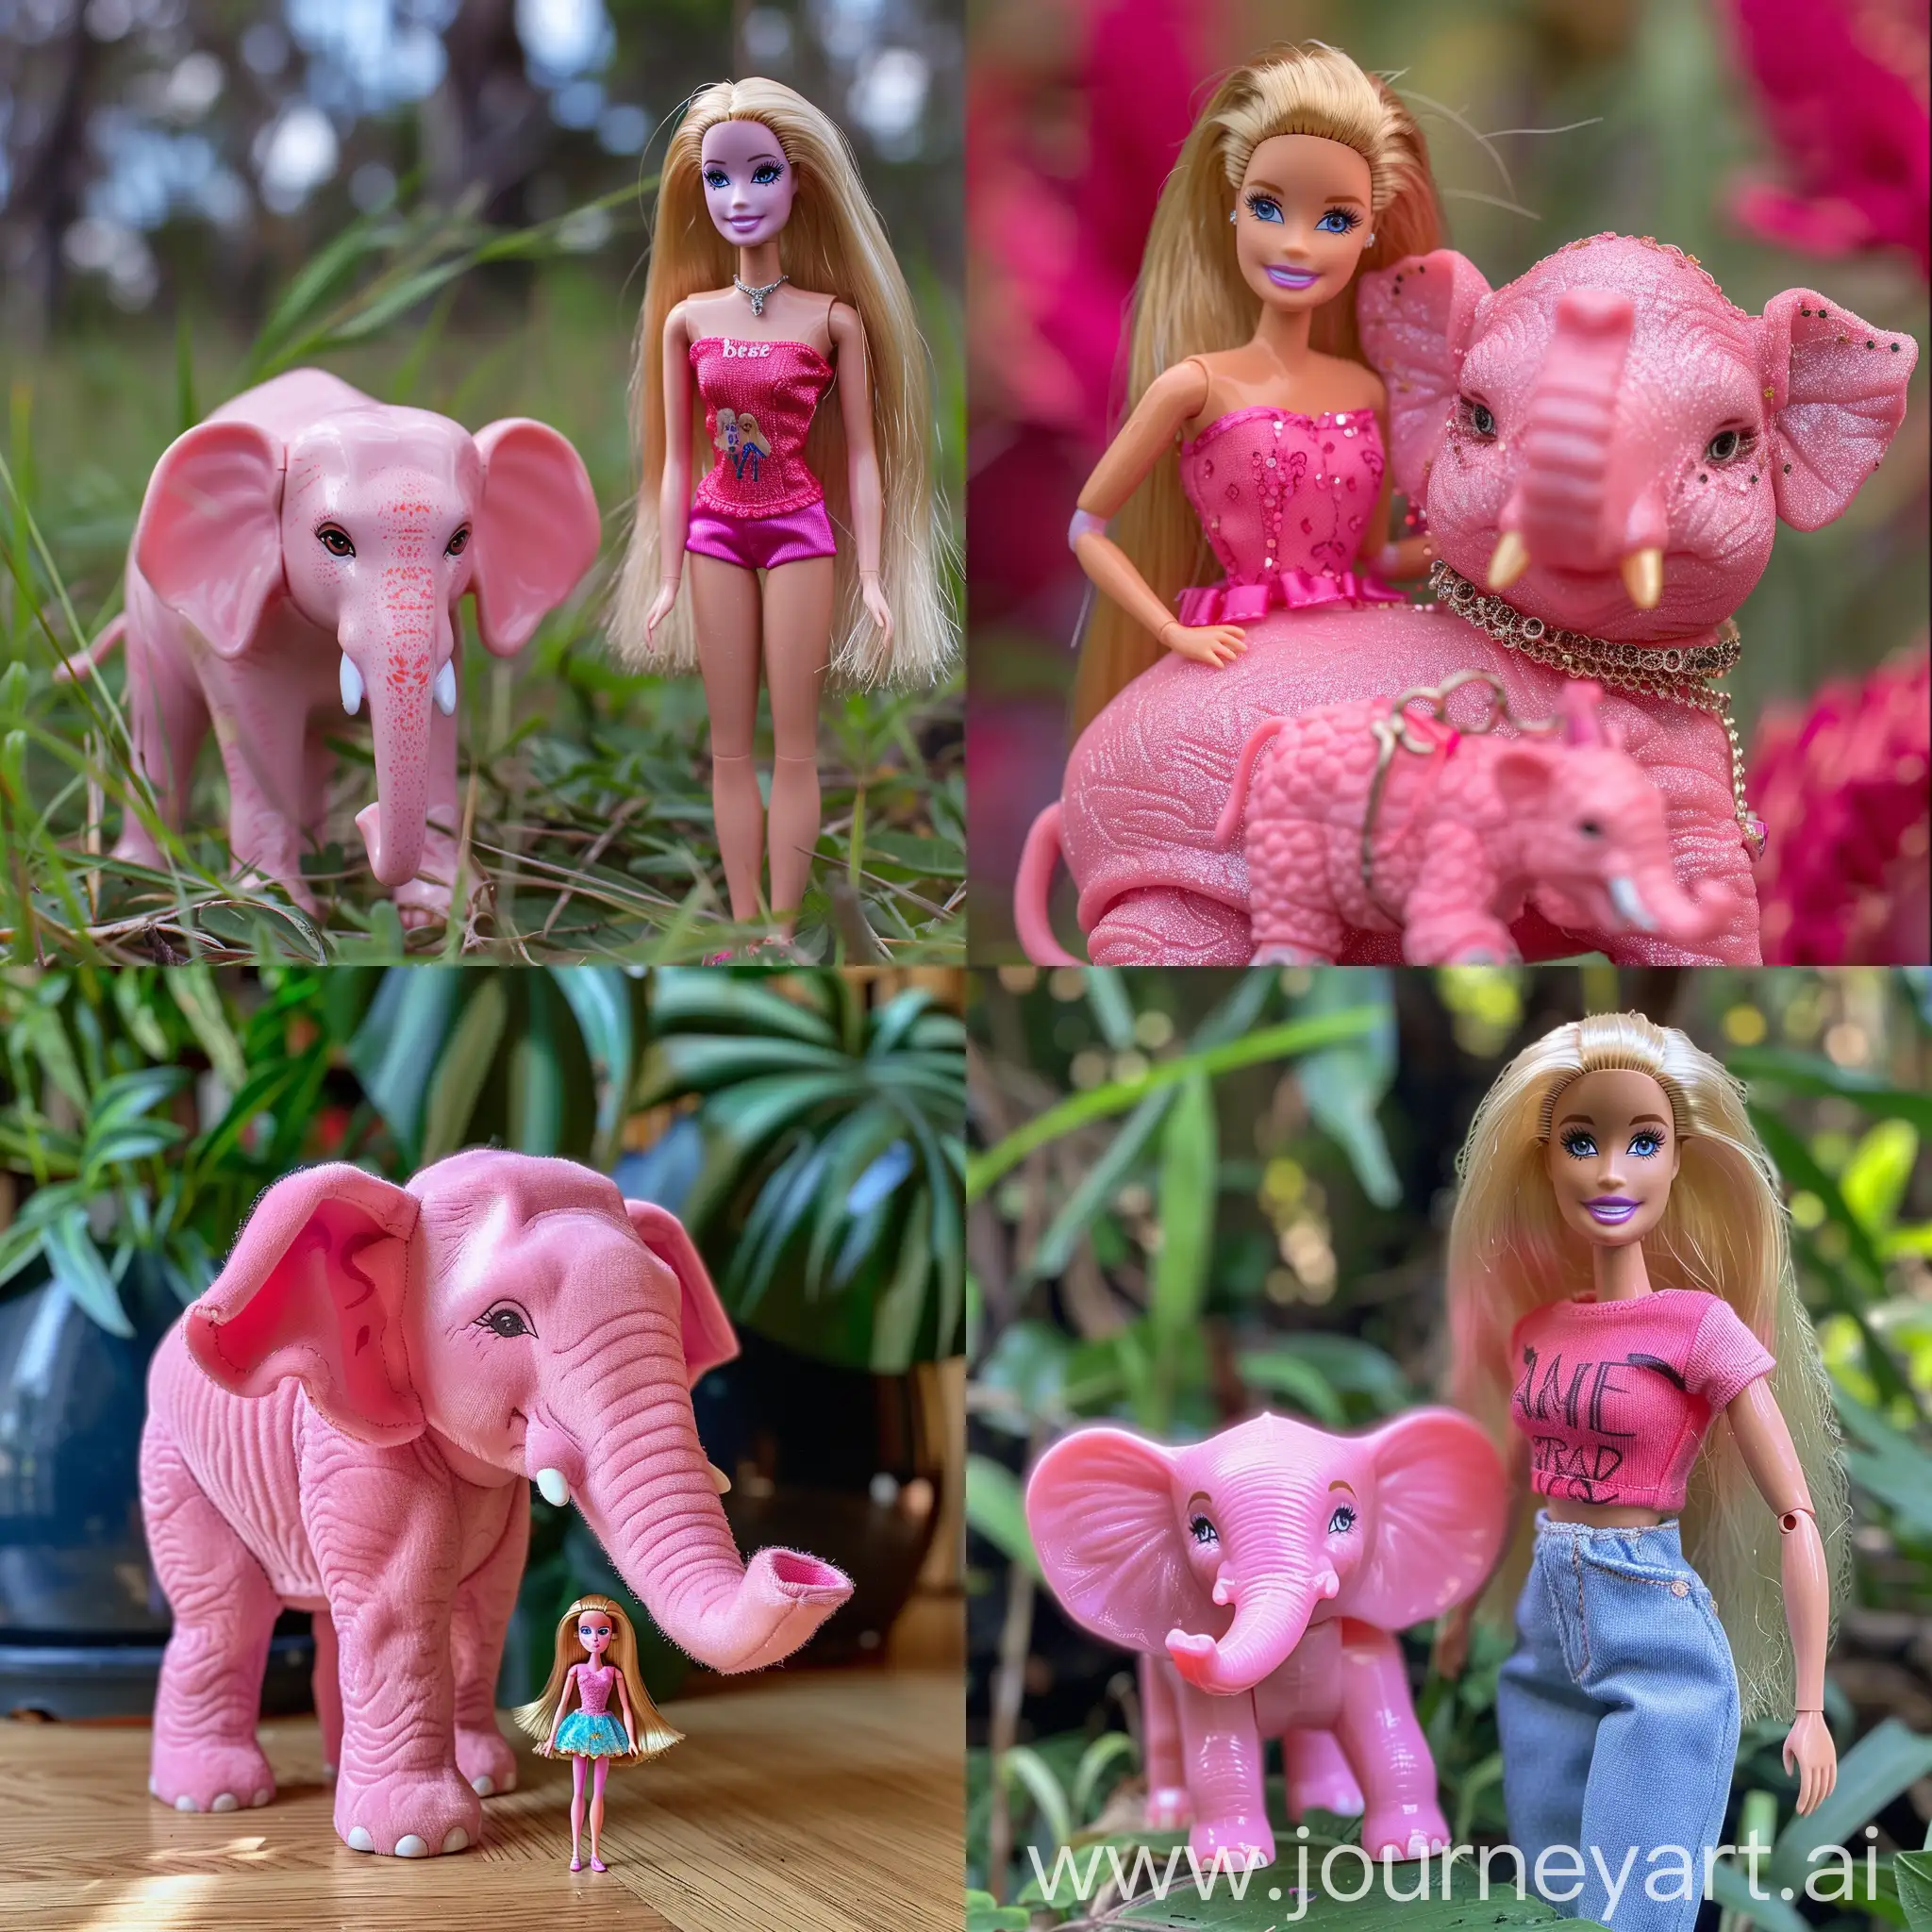 Whimsical-Pink-Elephant-and-Barbie-Doll-in-Playful-Encounter